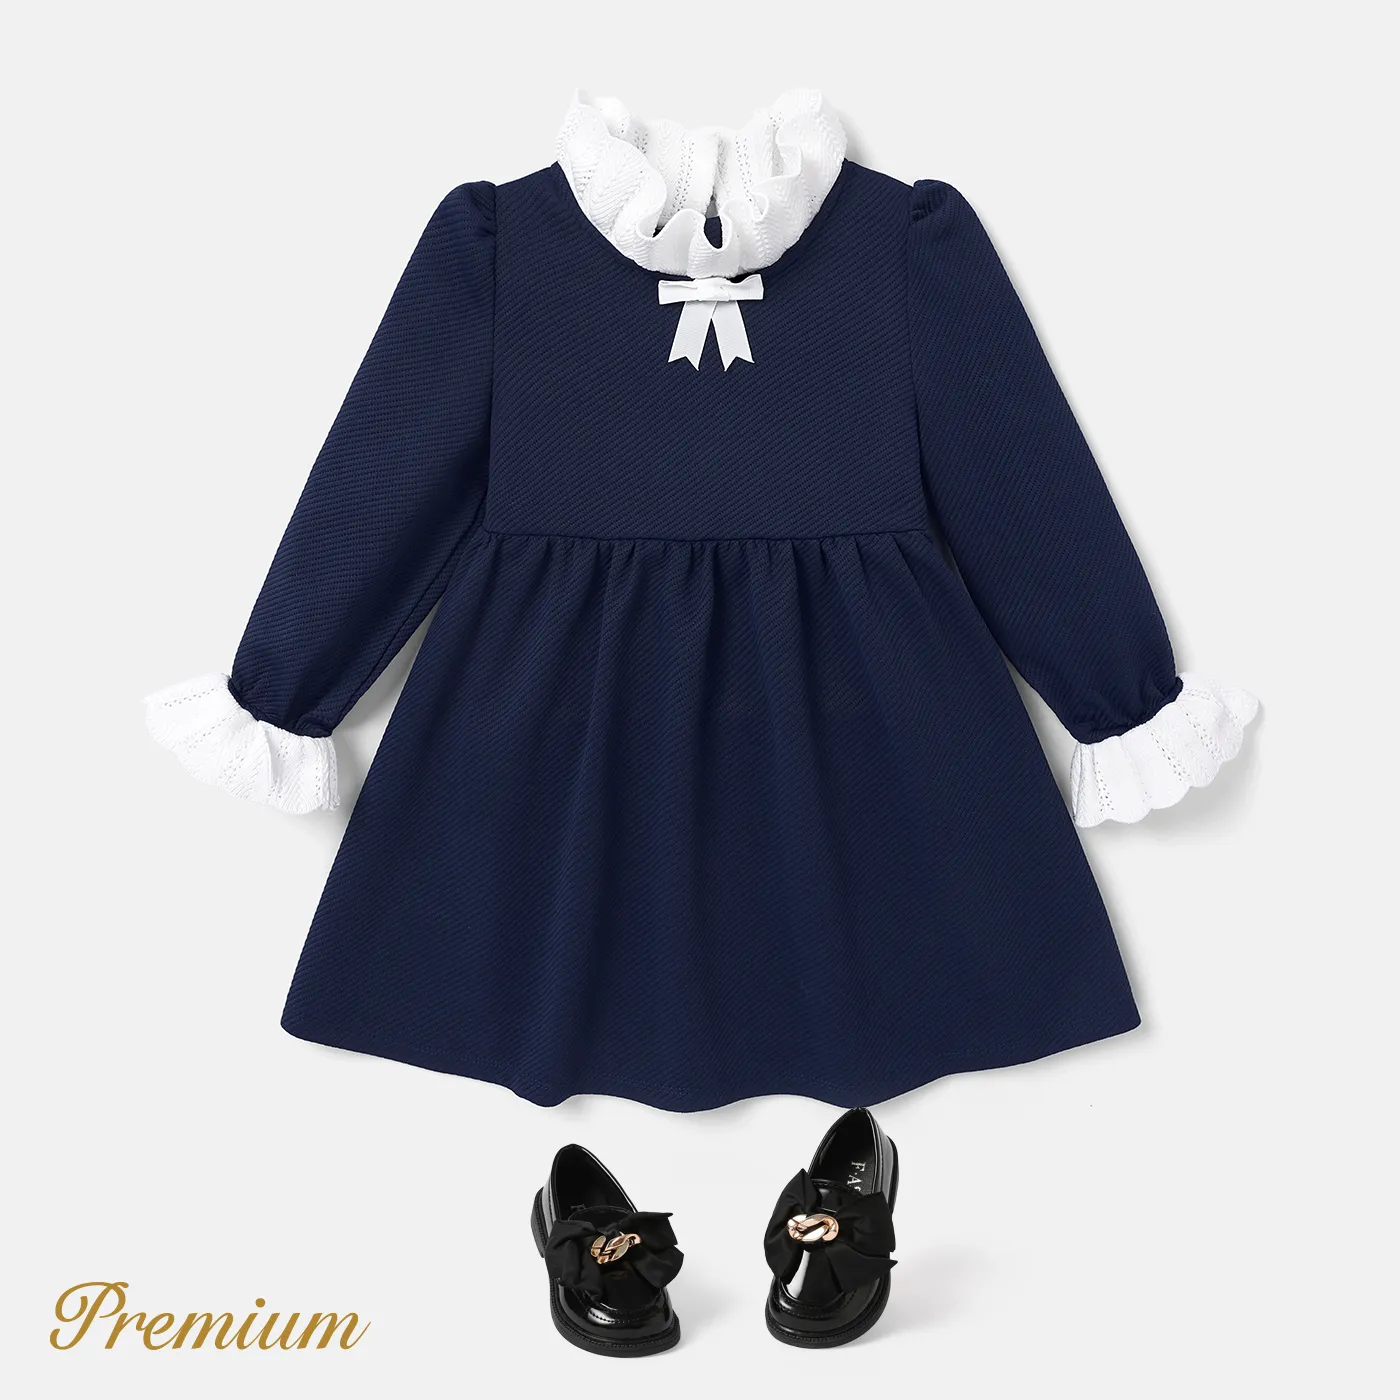 Medium Thickness Solid Color Long Sleeve Elegant Toddler Girl Dress with Stand Collar